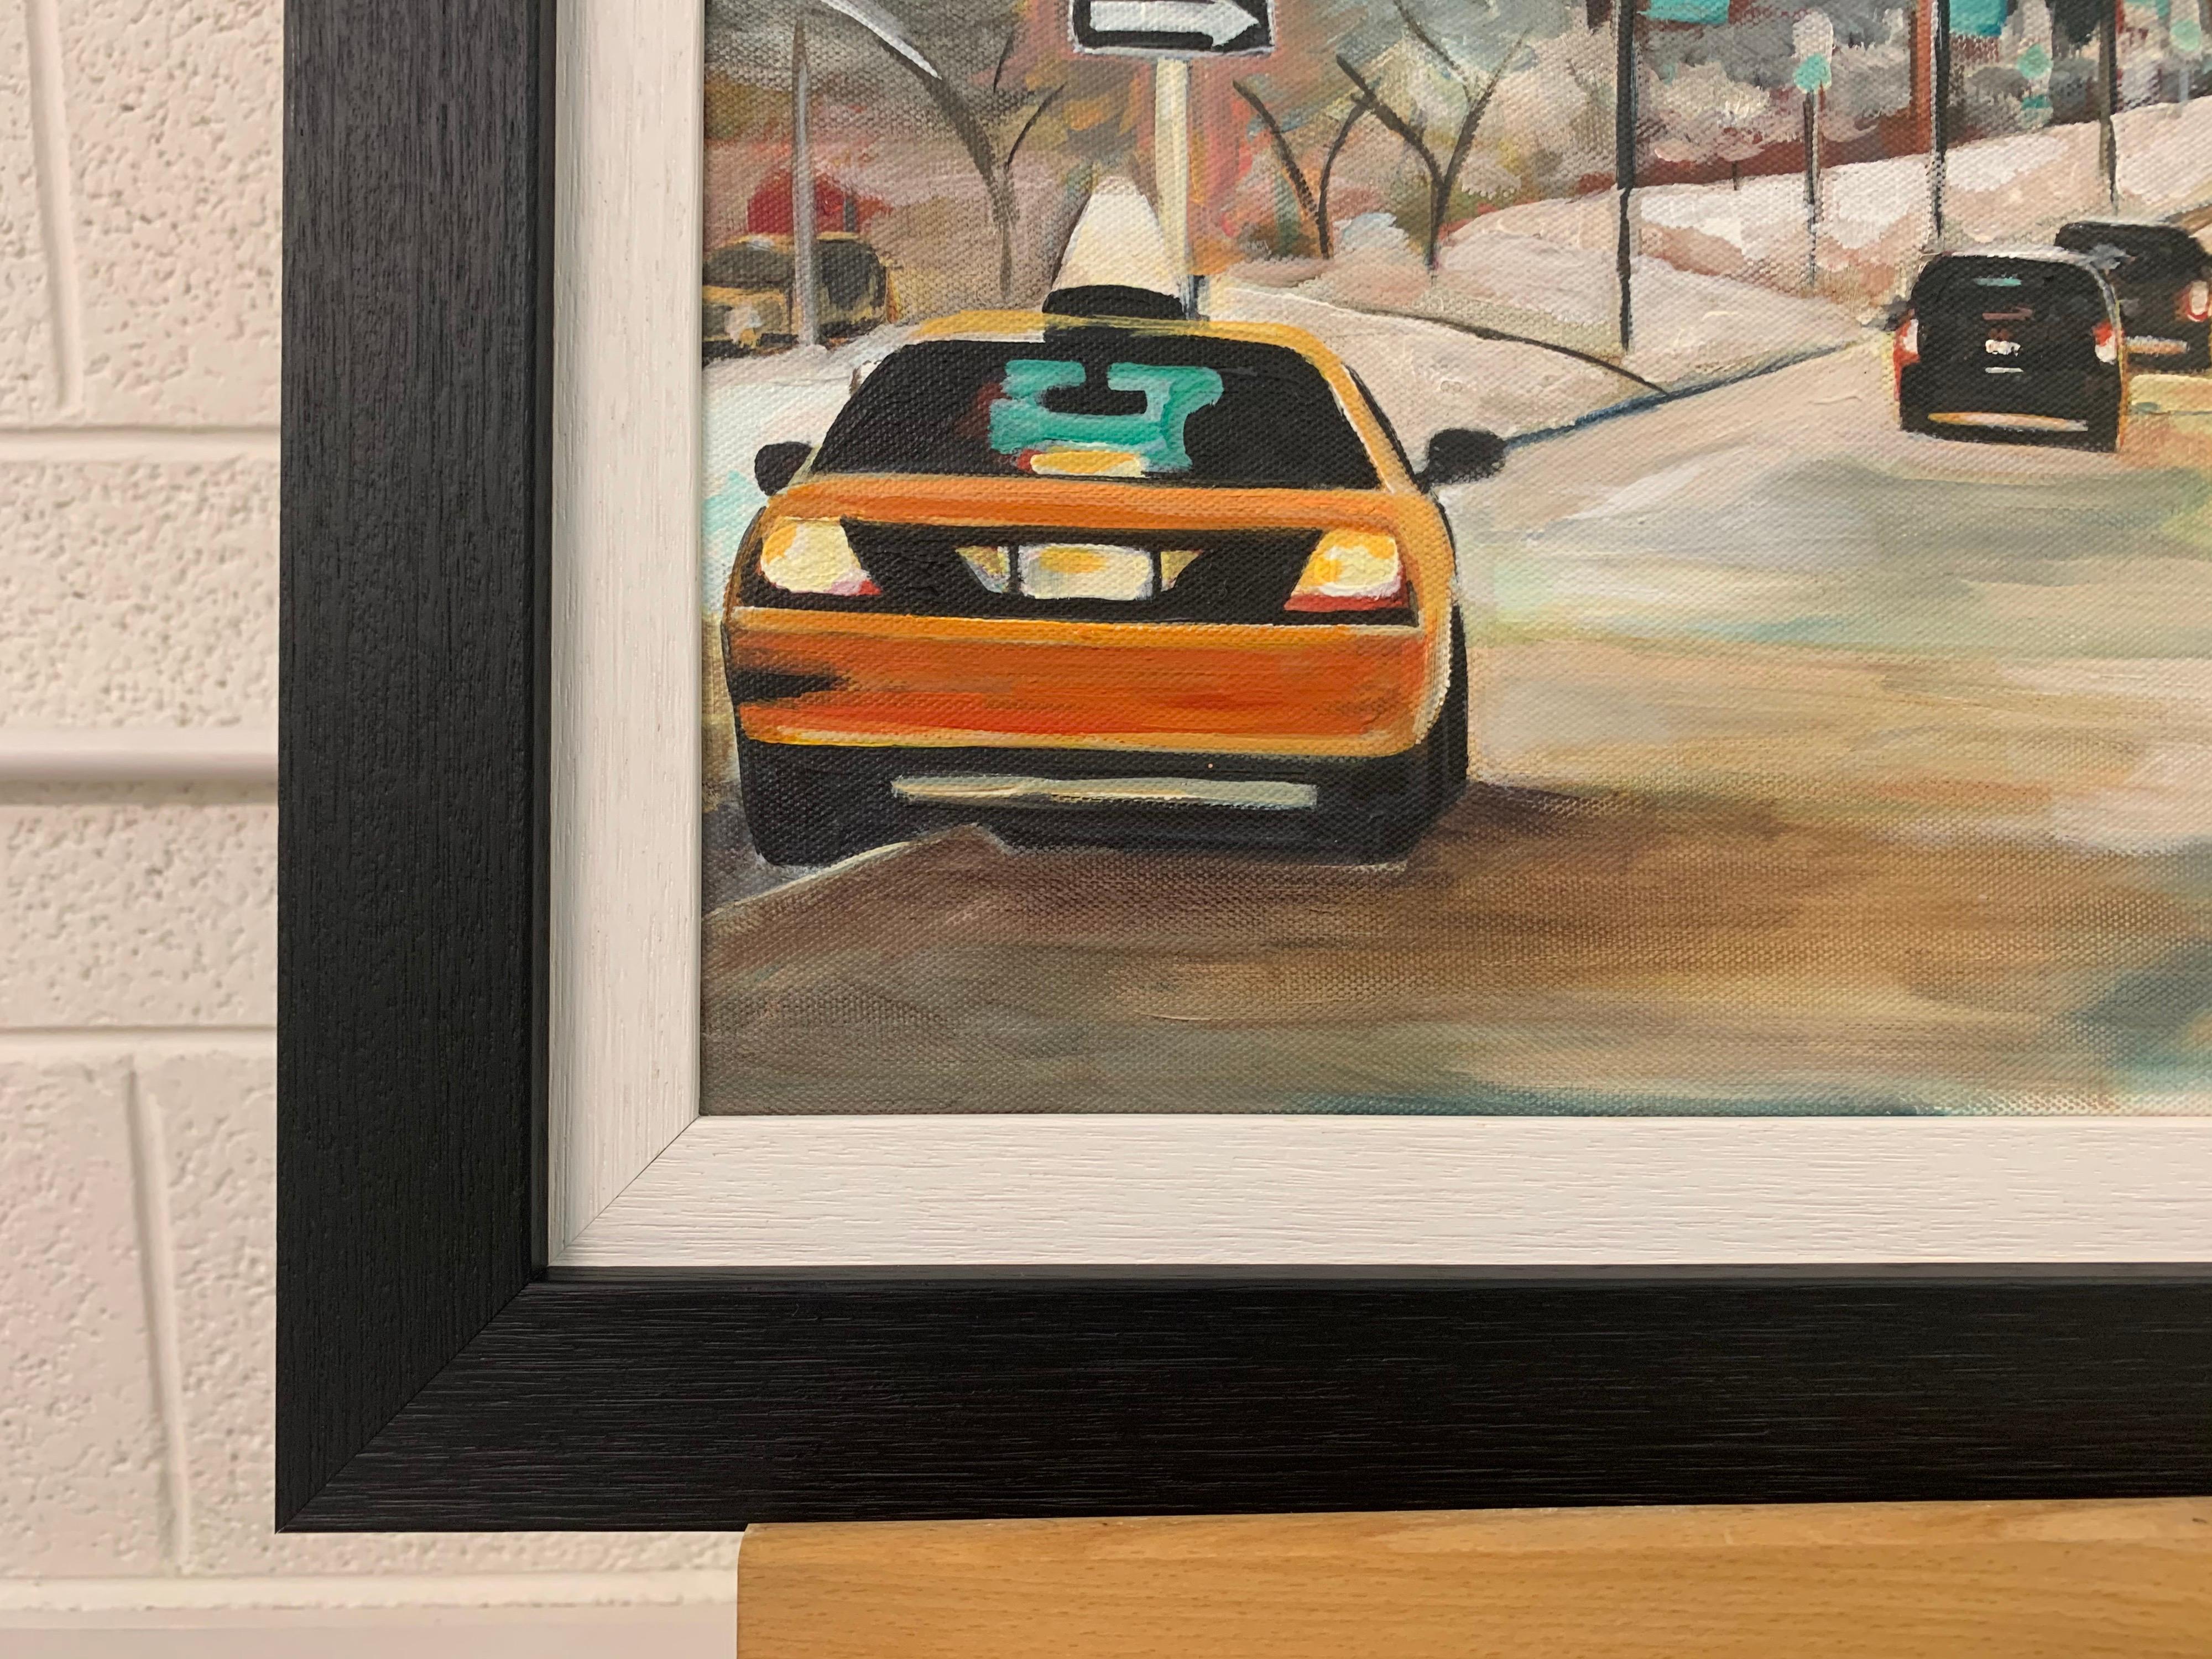 Painting of New York City Taxis in Winter Snow by Contemporary British Artist For Sale 1